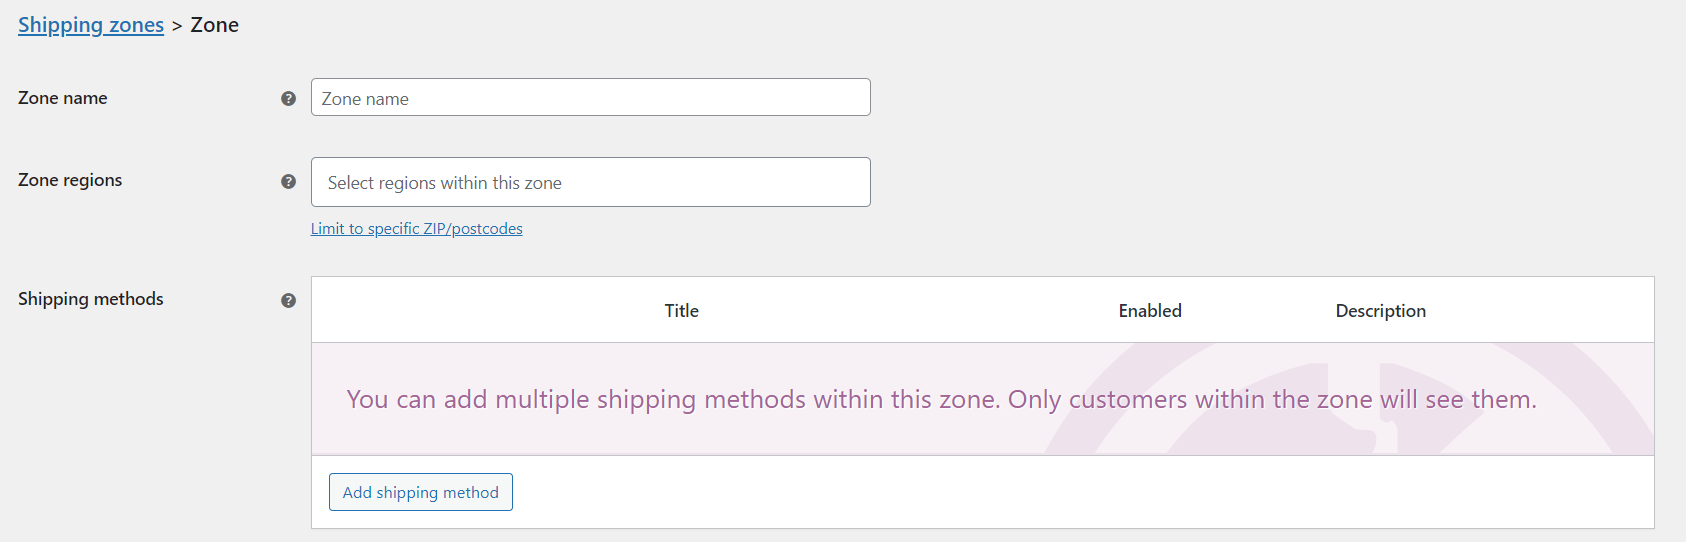 new shipping zone settings